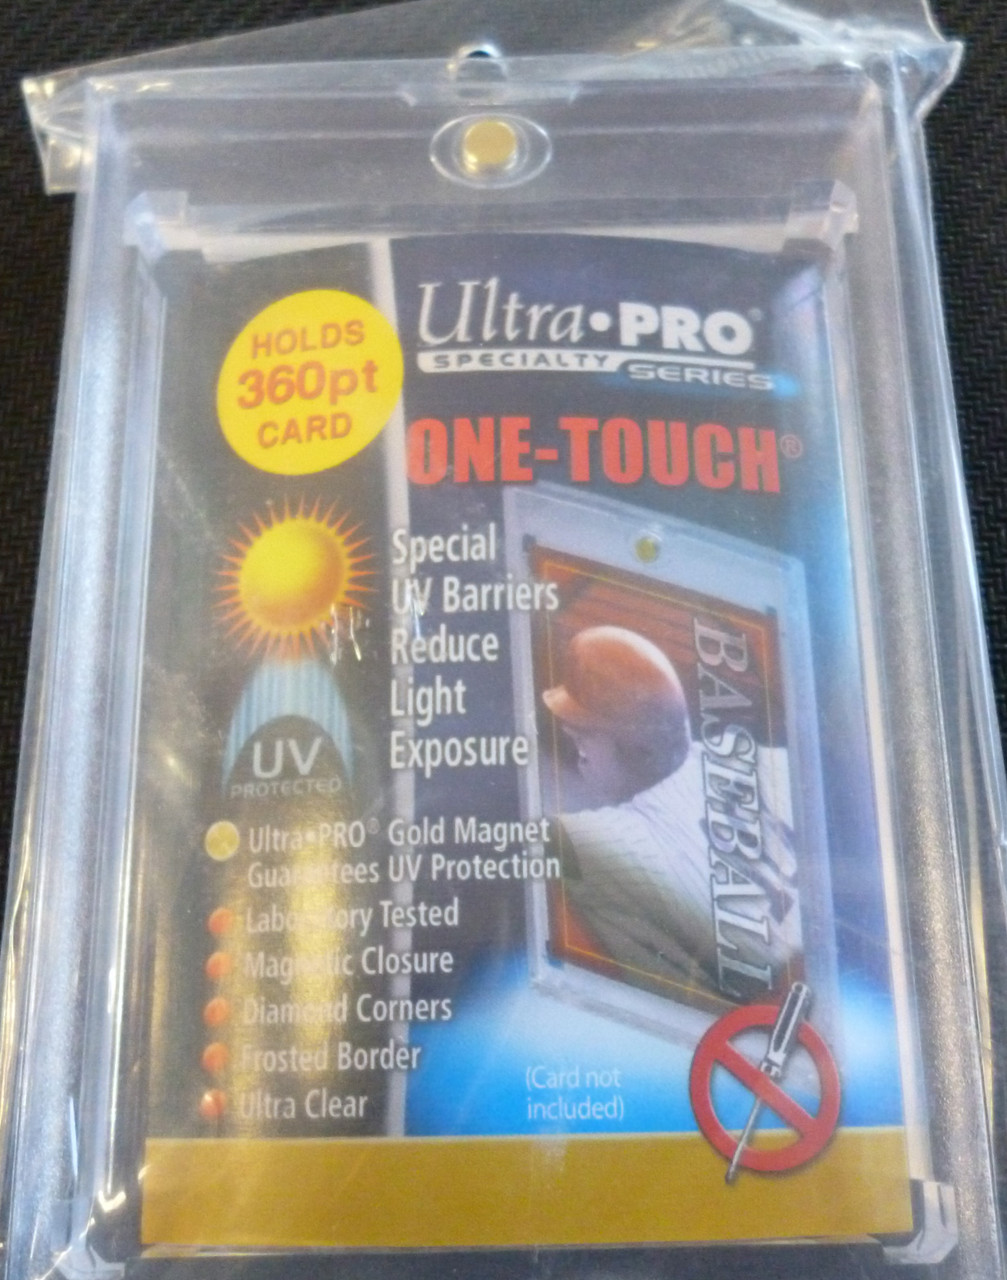 2 ULTRA PRO One Touch Magnetic Holders 360pt UV Gold Magnet New 